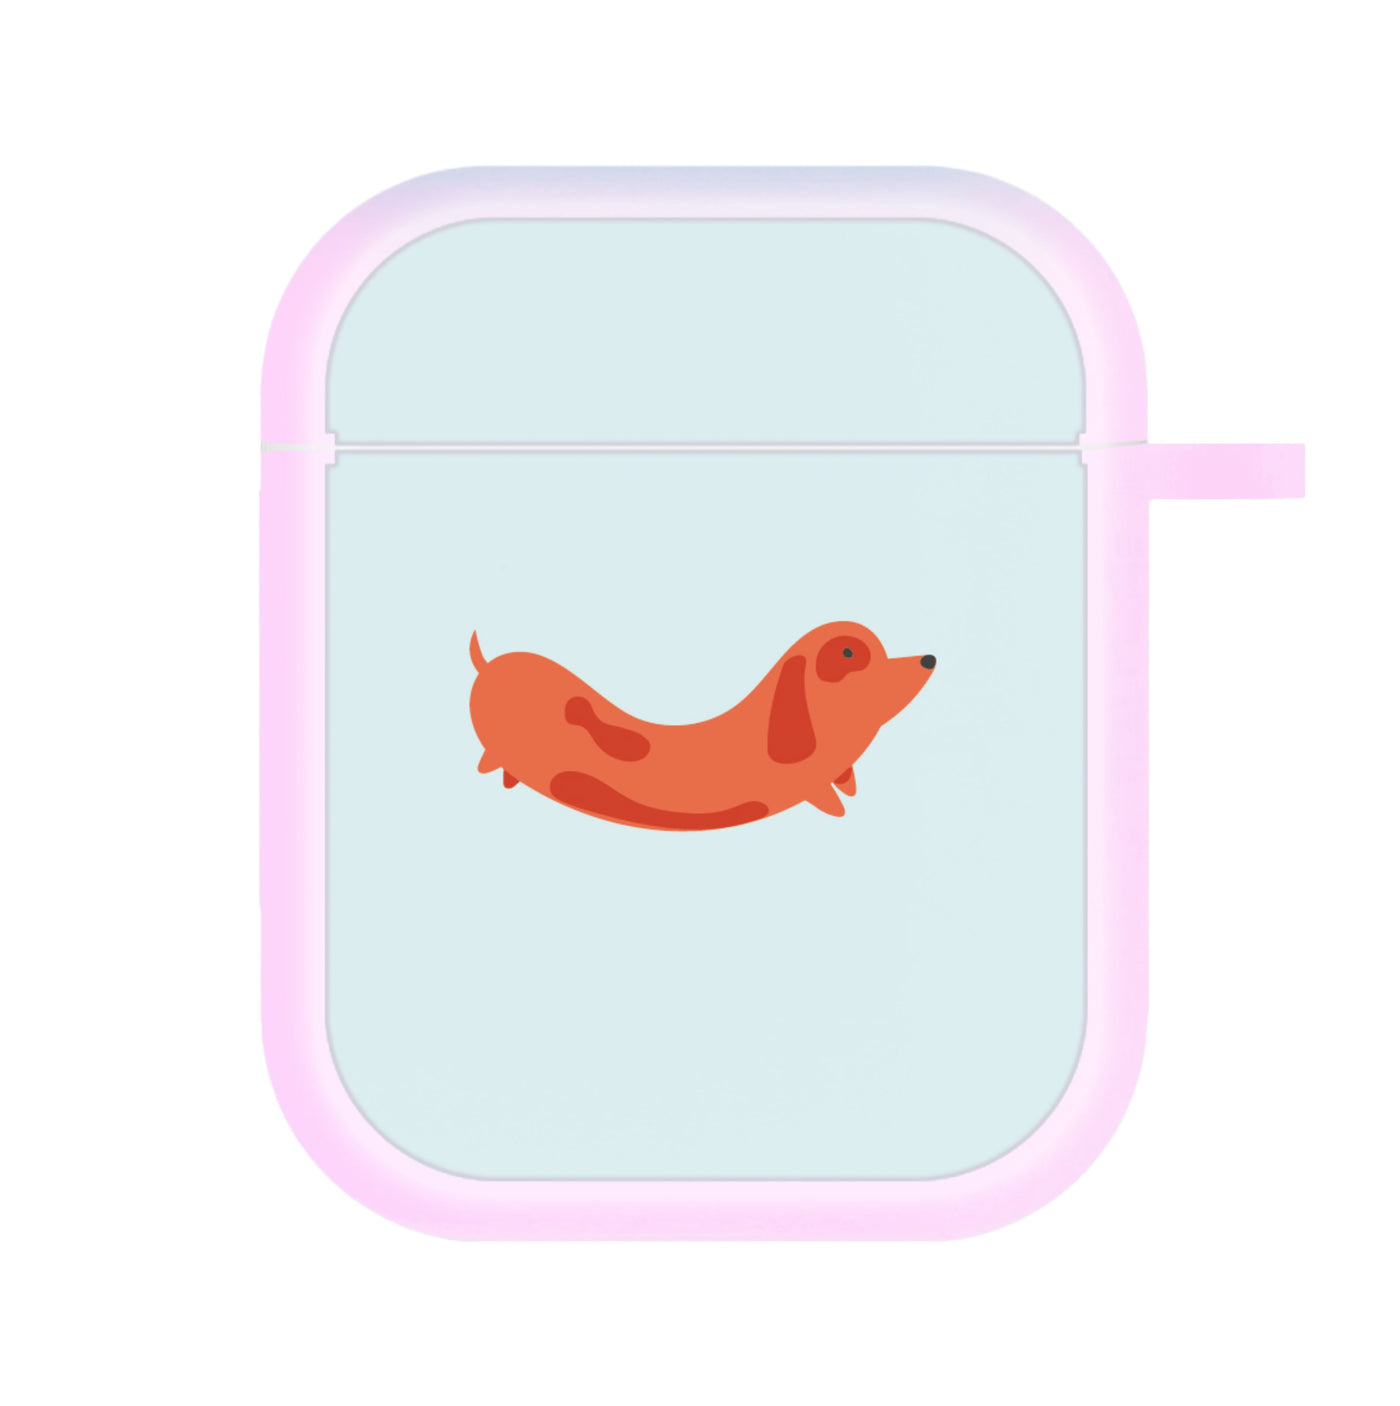 Little sausage - Dachshunds AirPods Case